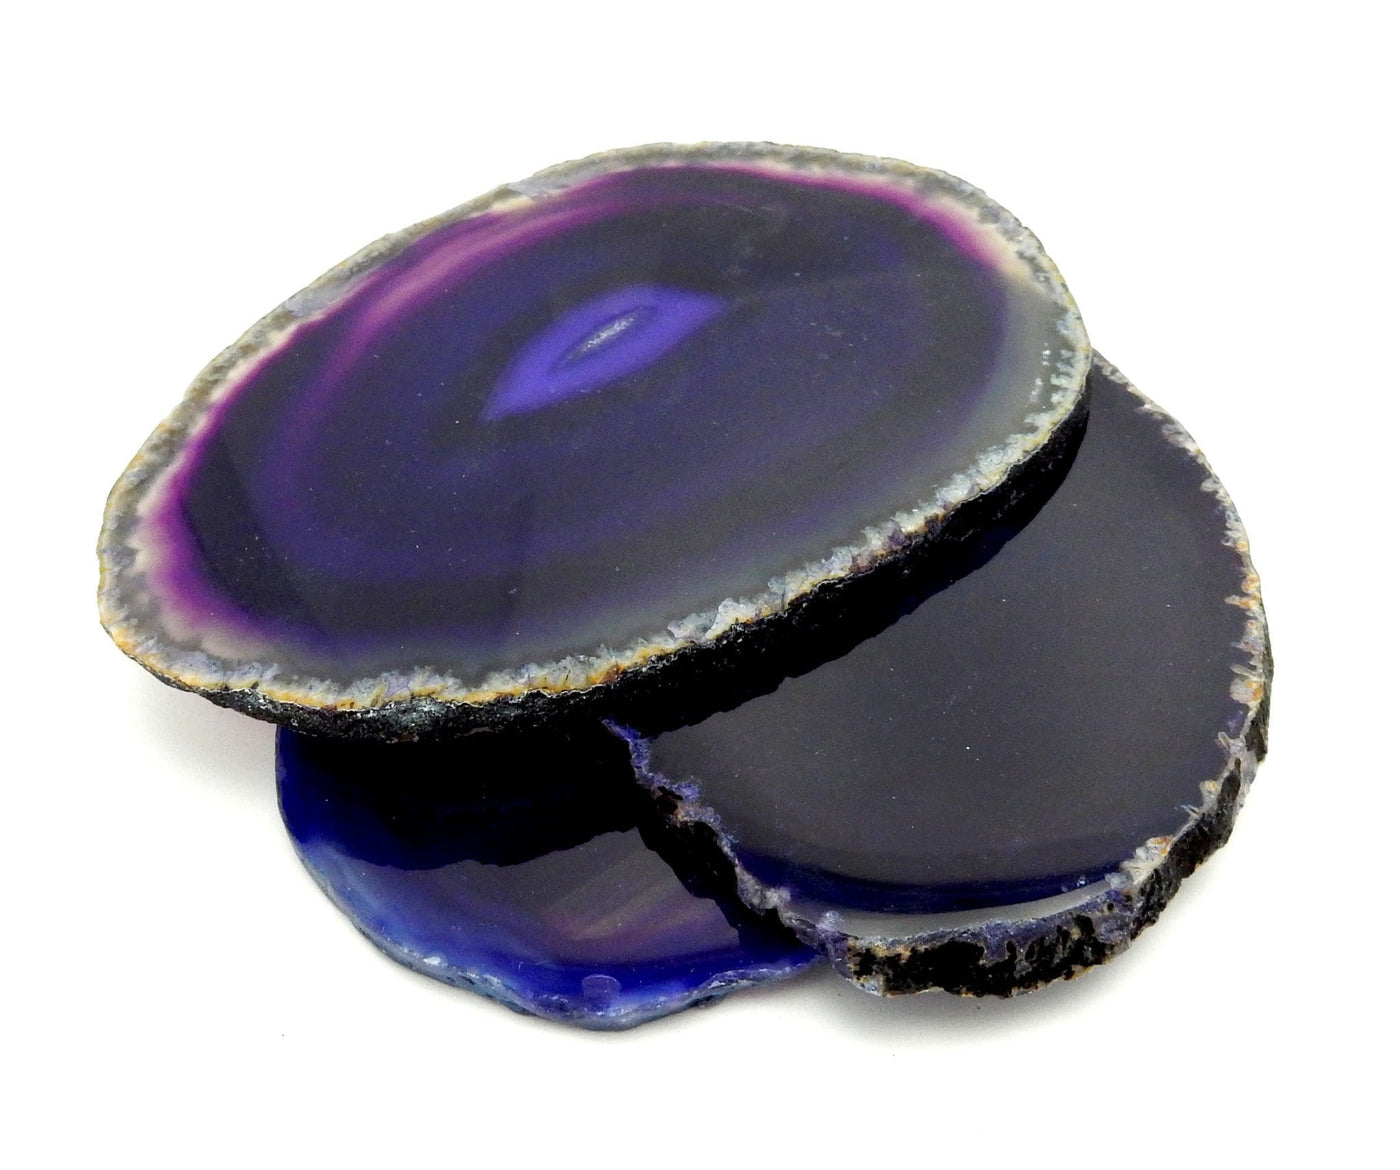 Purple Agate Slices displayed side view to view thickness